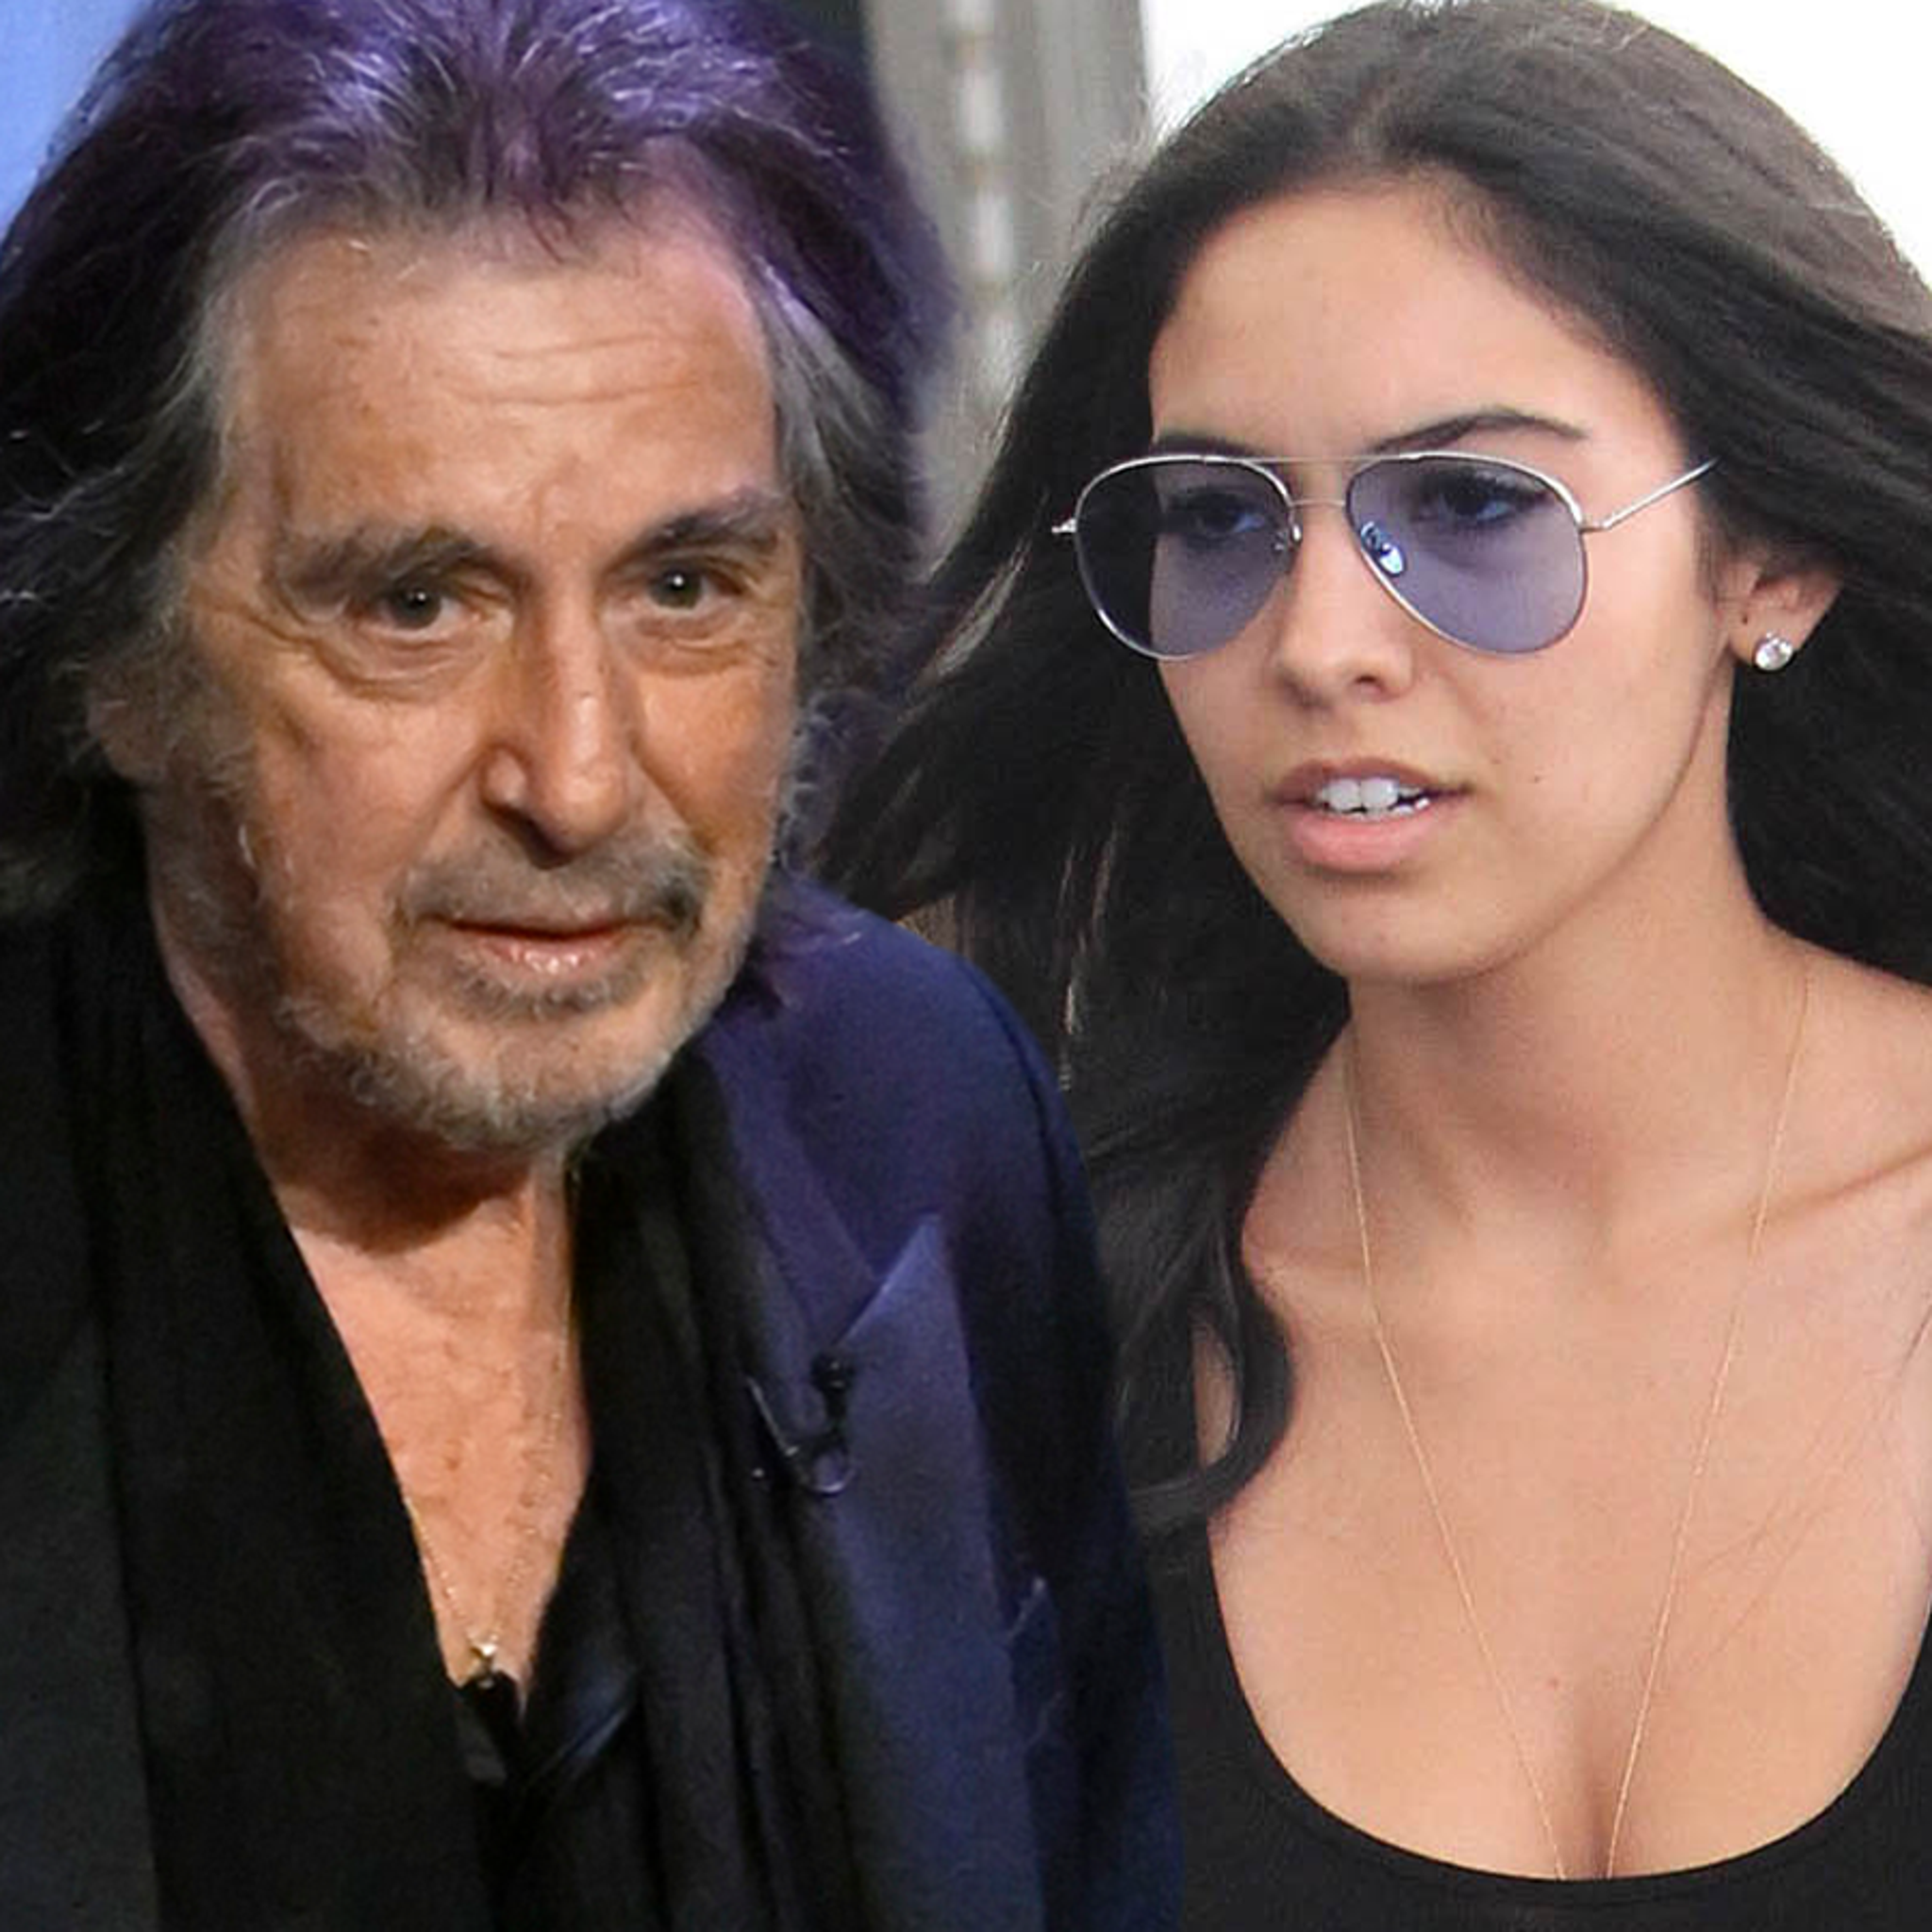 Al Pacino Demanded DNA Test, Didn't Believe He Could Impregnate Anyone